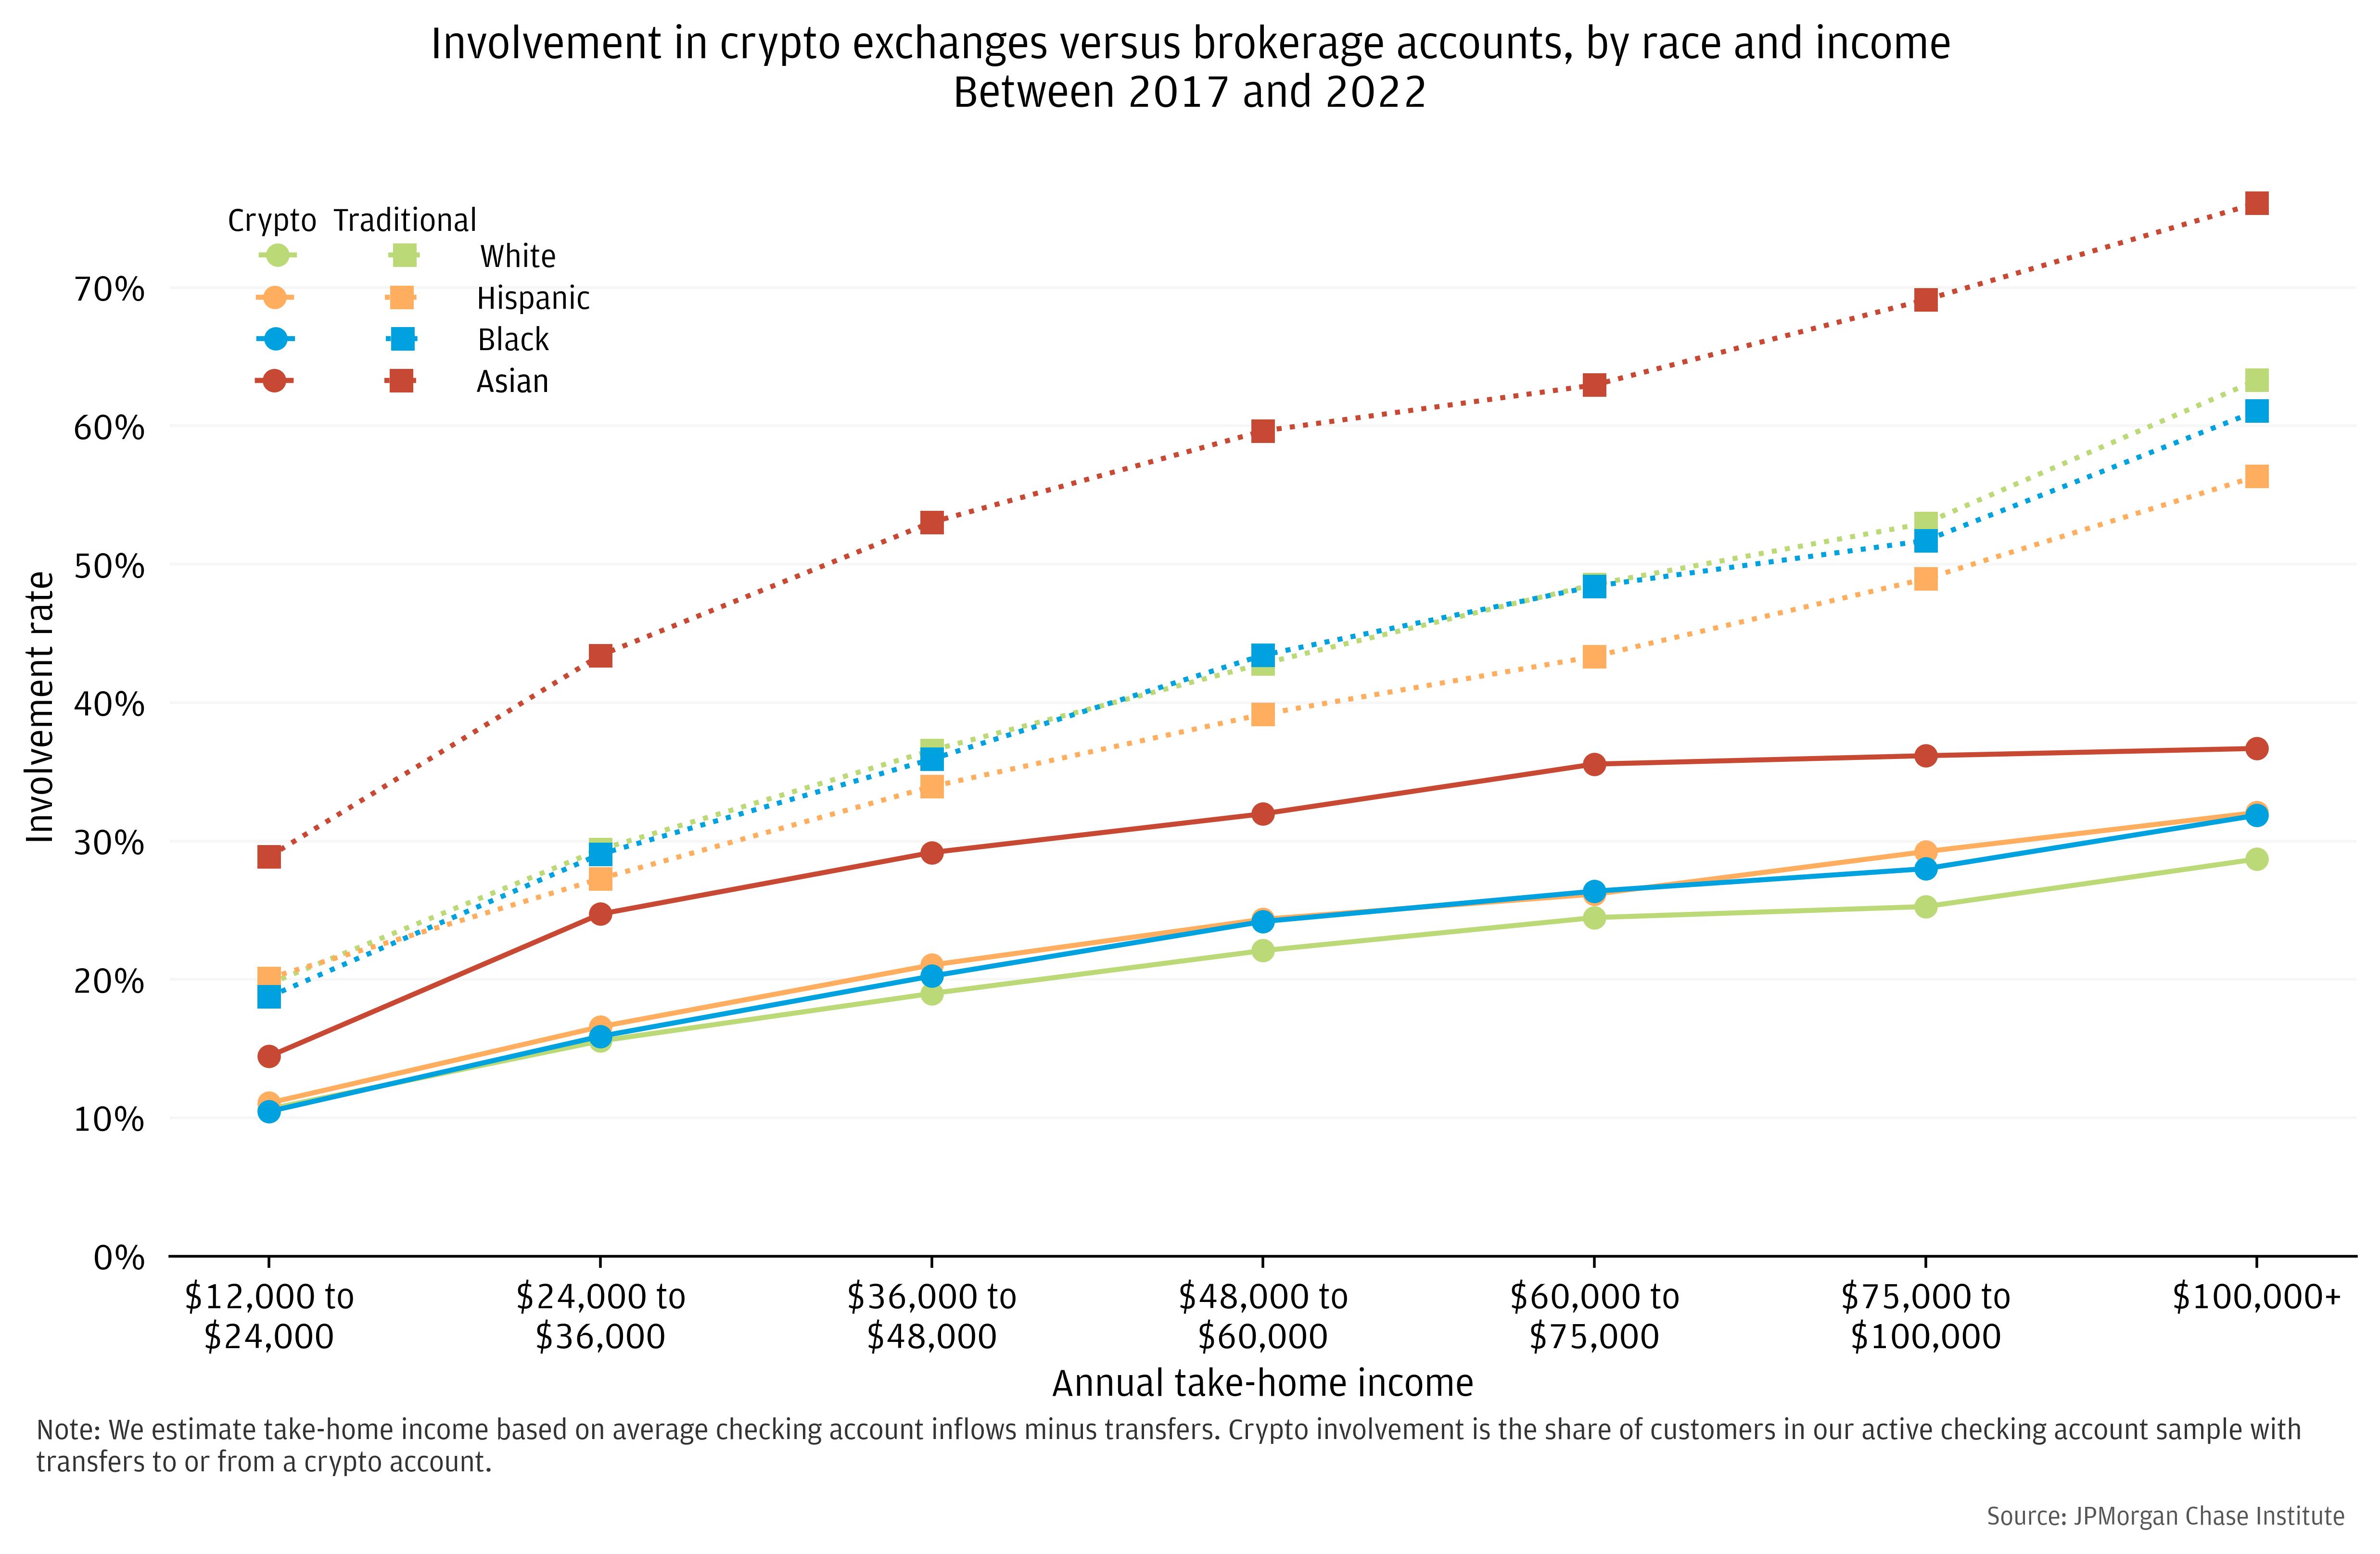 Use of both crypto accounts and traditional investments generally increases with income across racial groups.